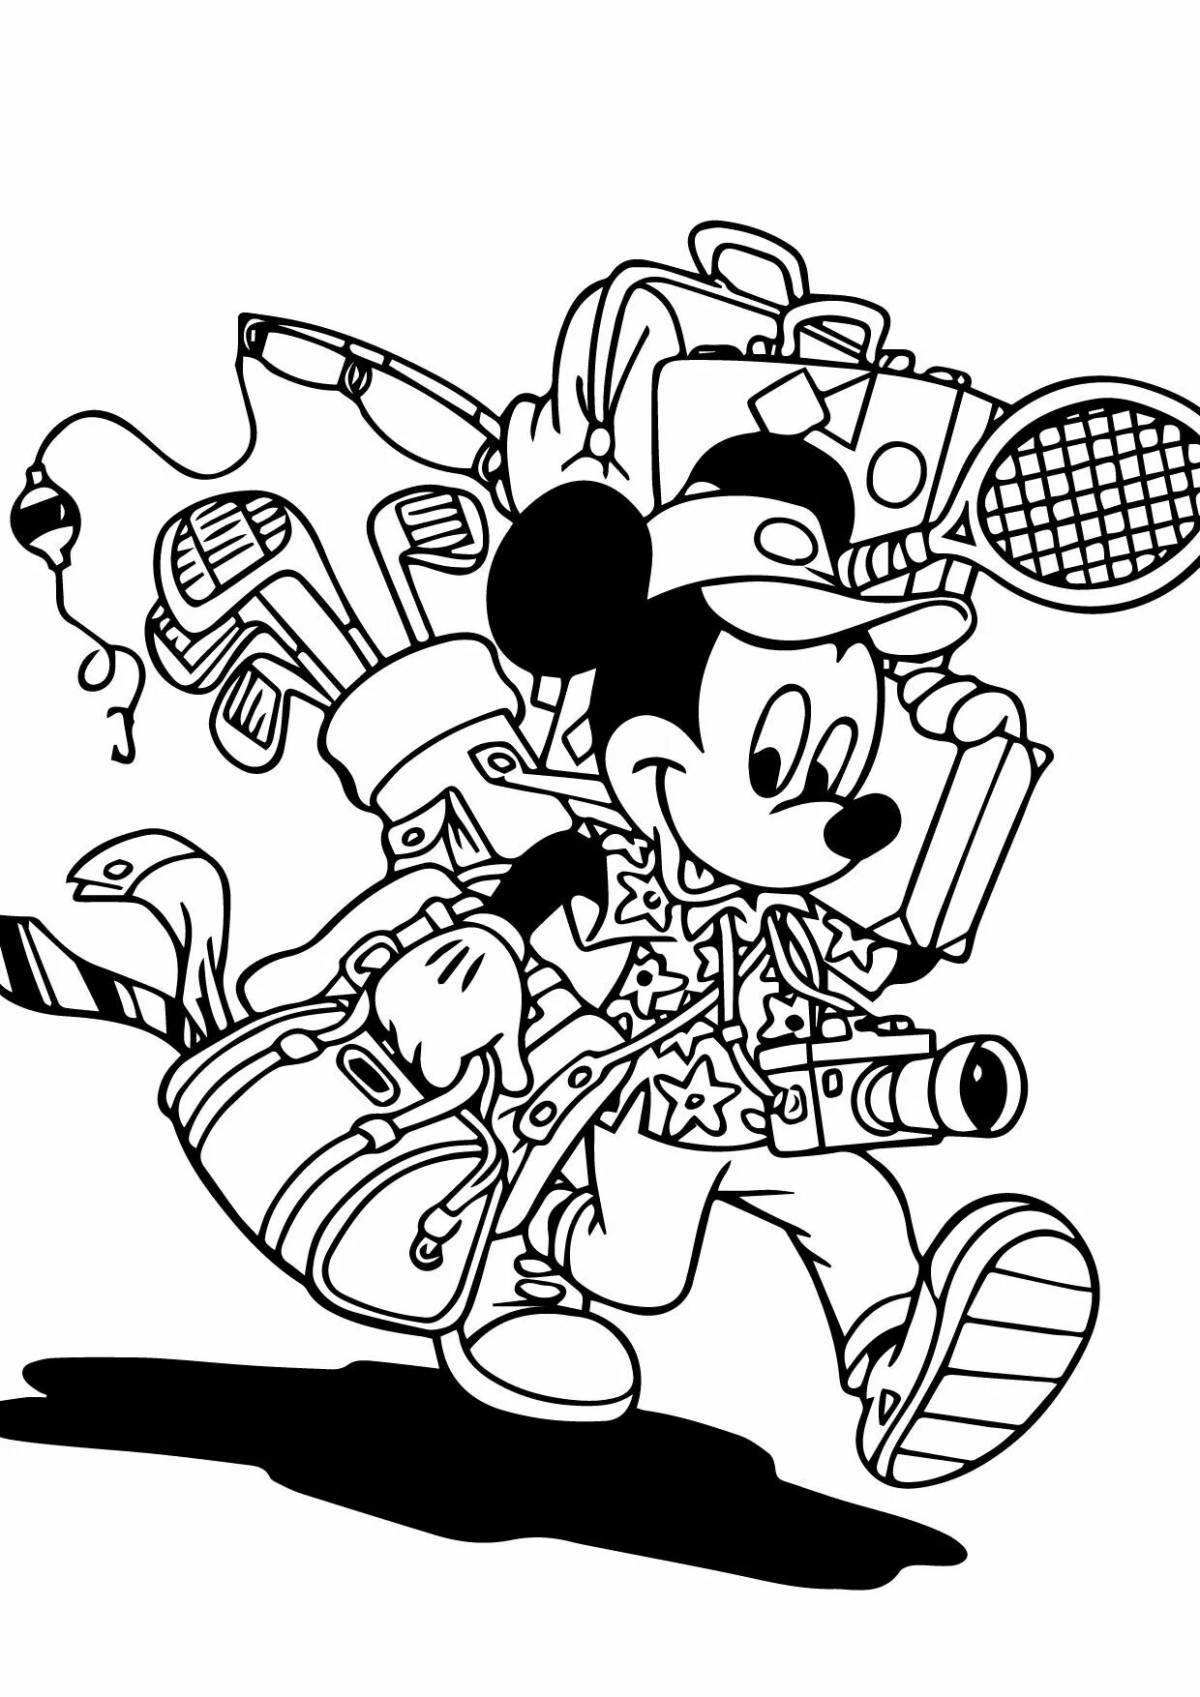 Live mickey games coloring page